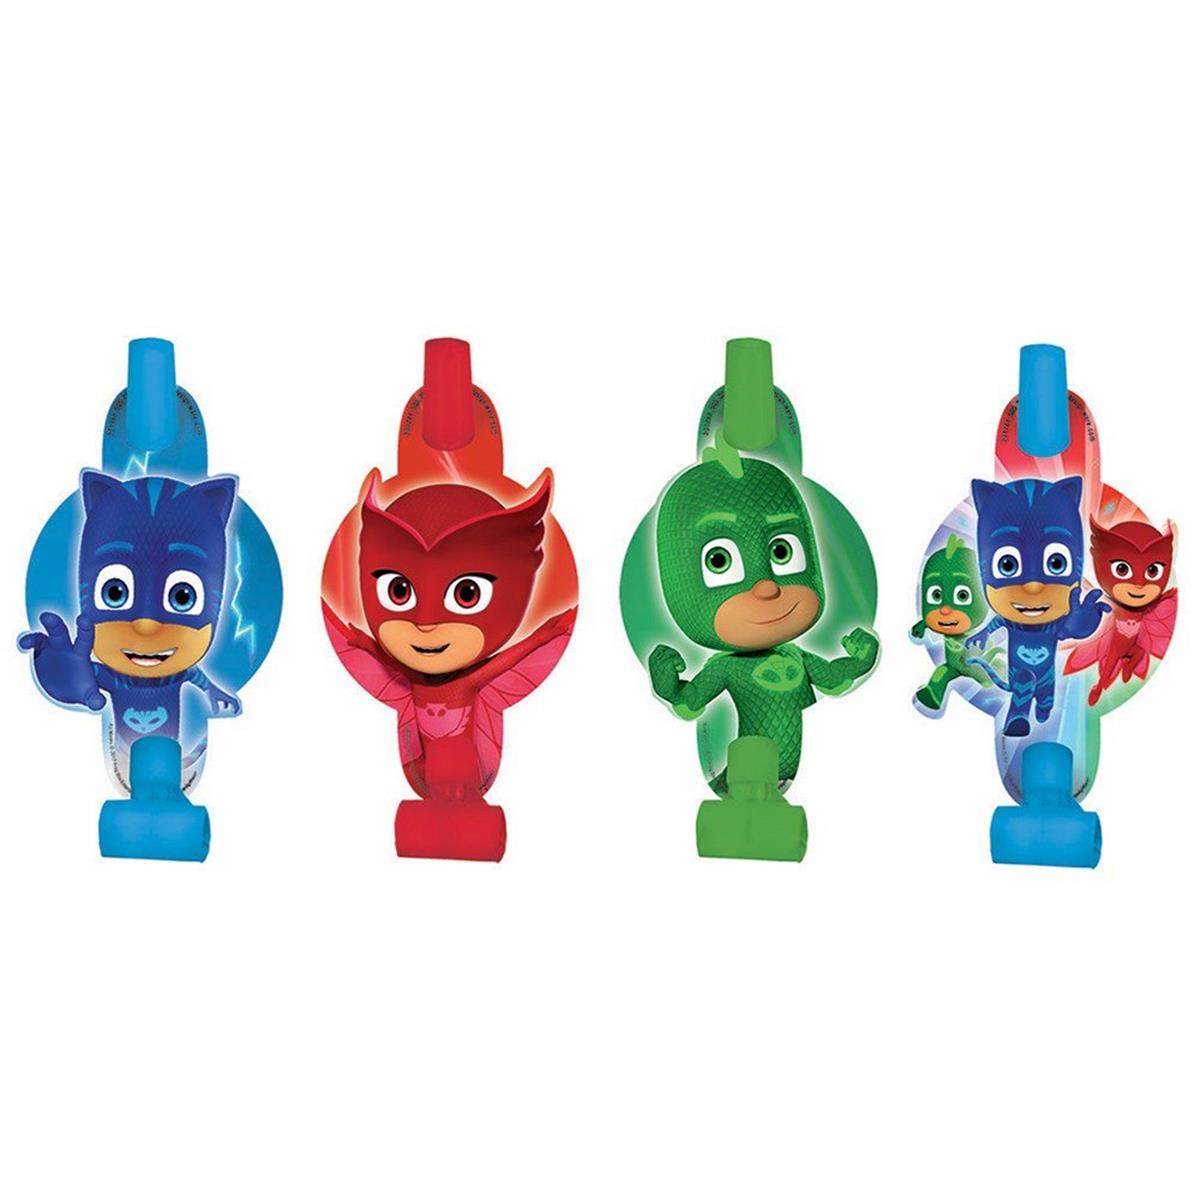 Picture of Amscan 261820 PJ Masks Blowouts - 8 Count